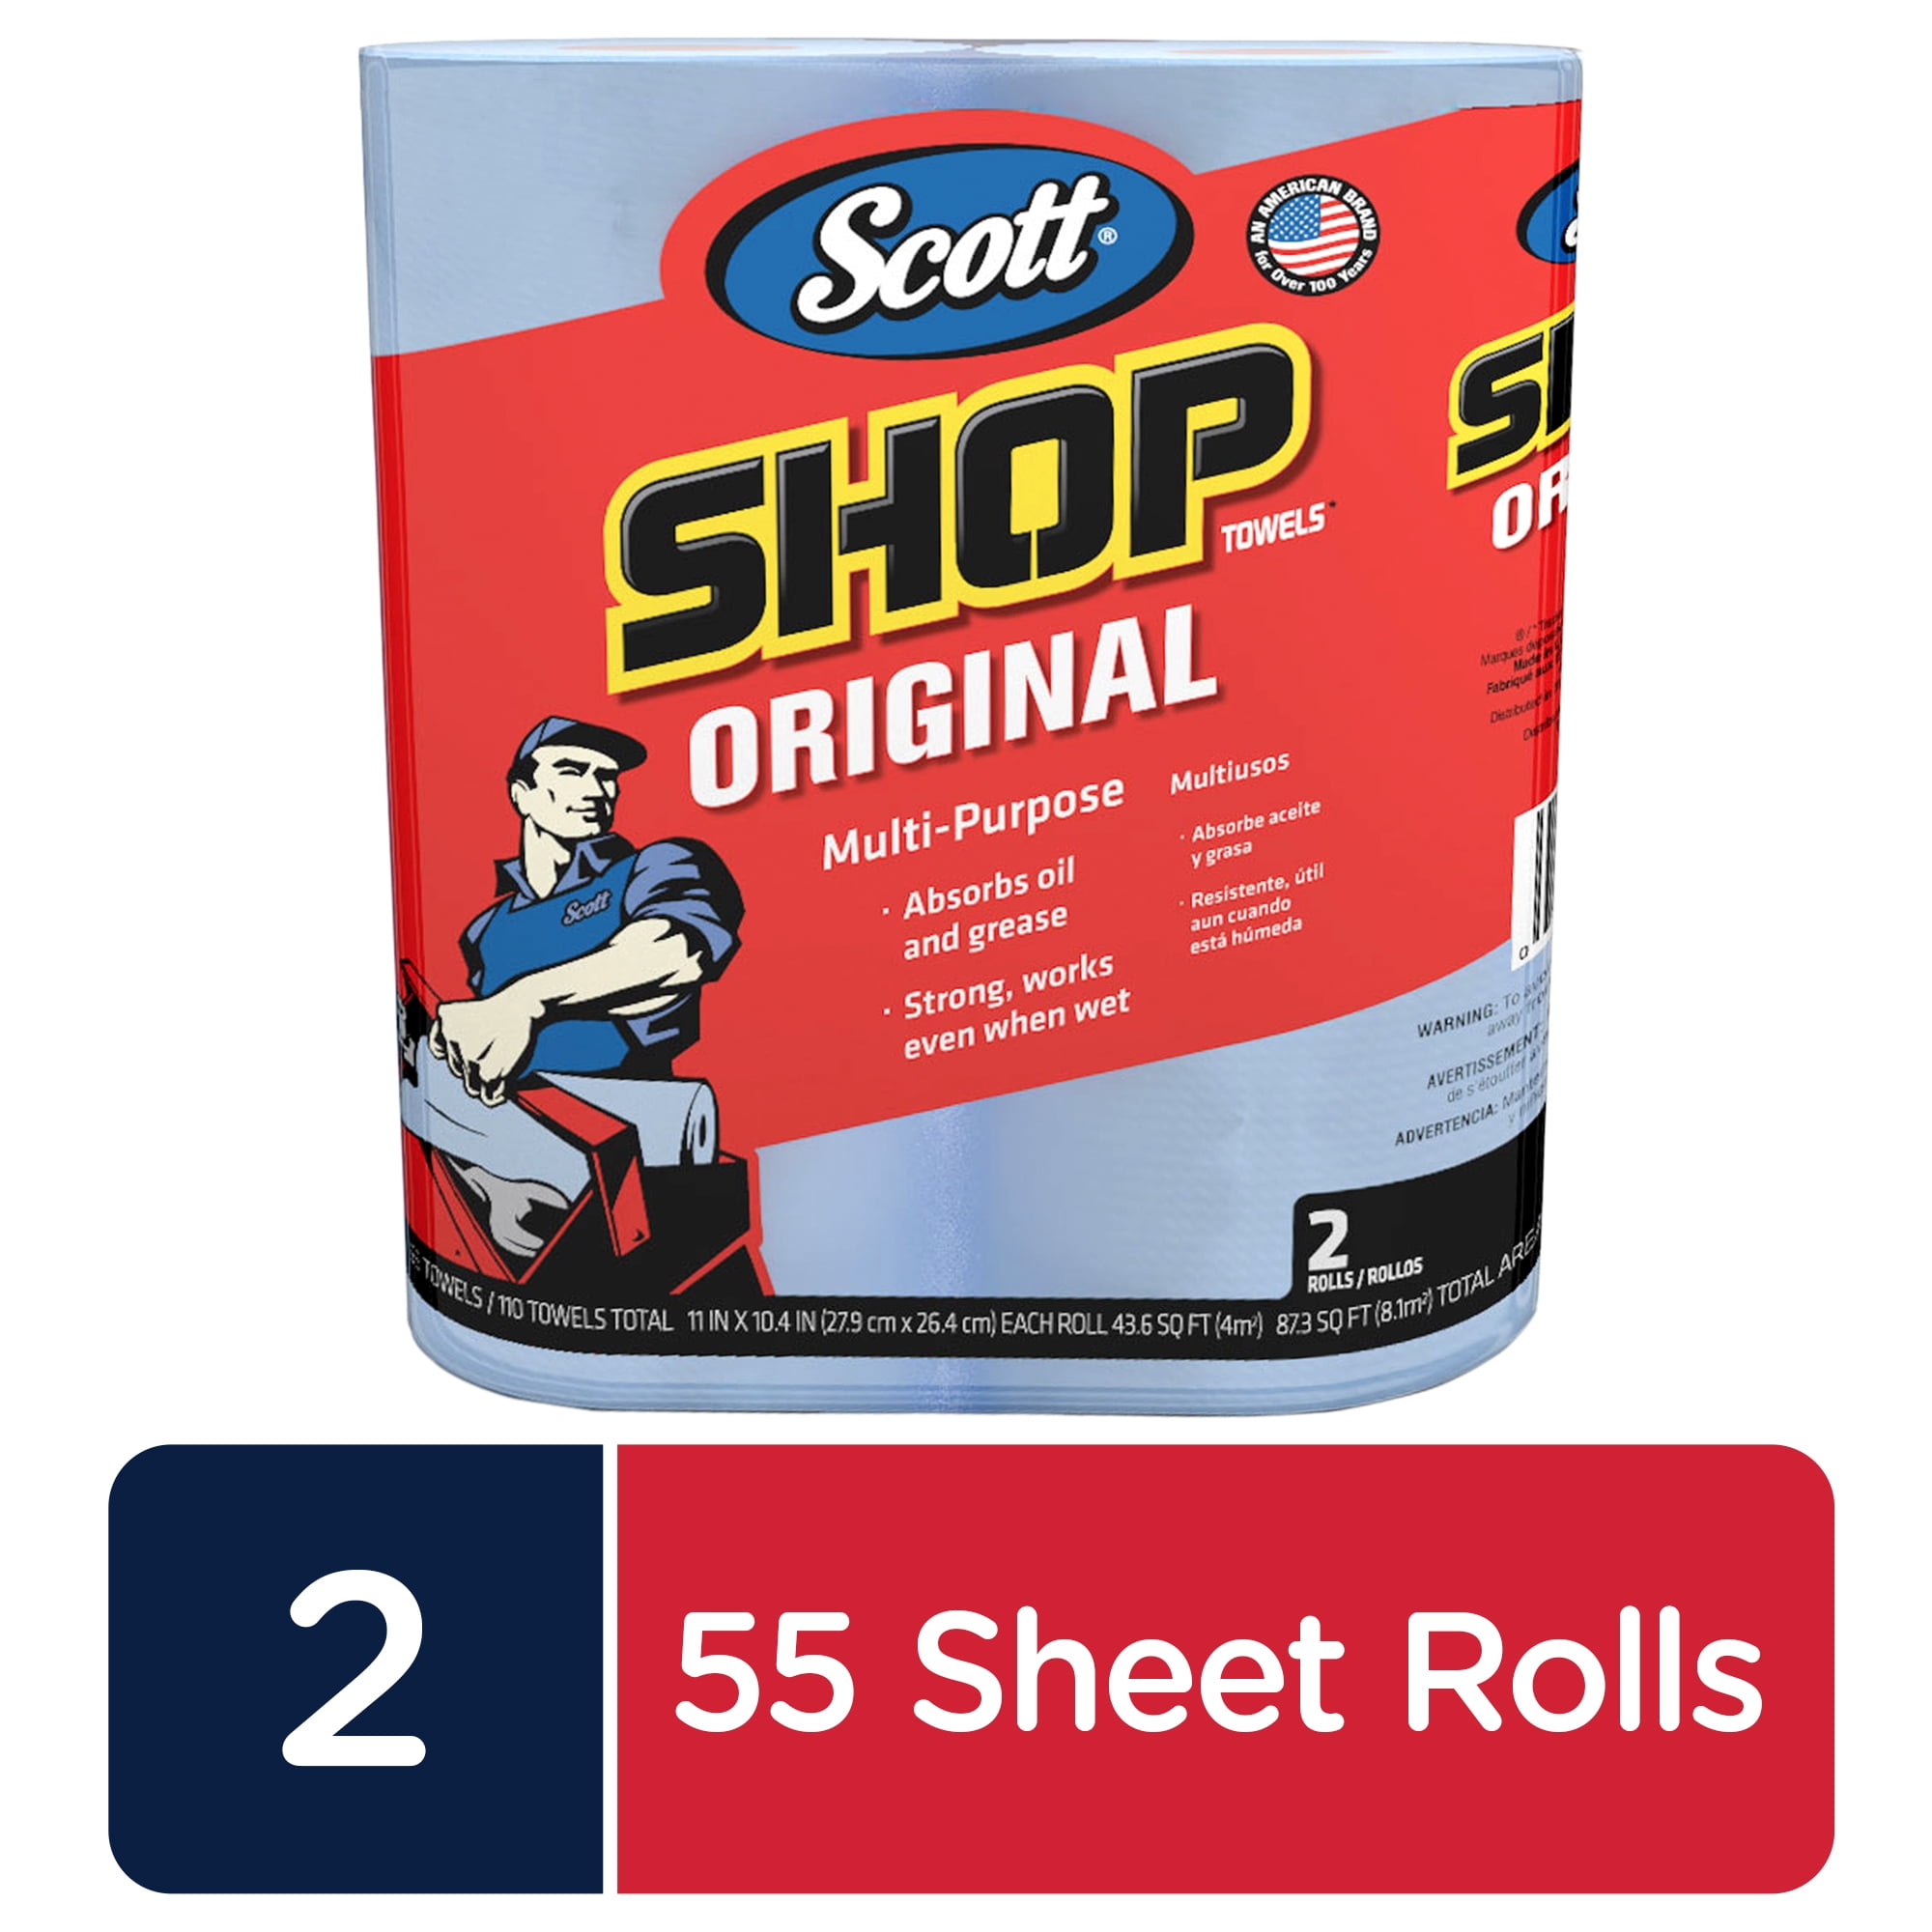 Industrial 5 pack Red Shop Towels 12" x 14" Cleaning Rags Home Car Auto Garage